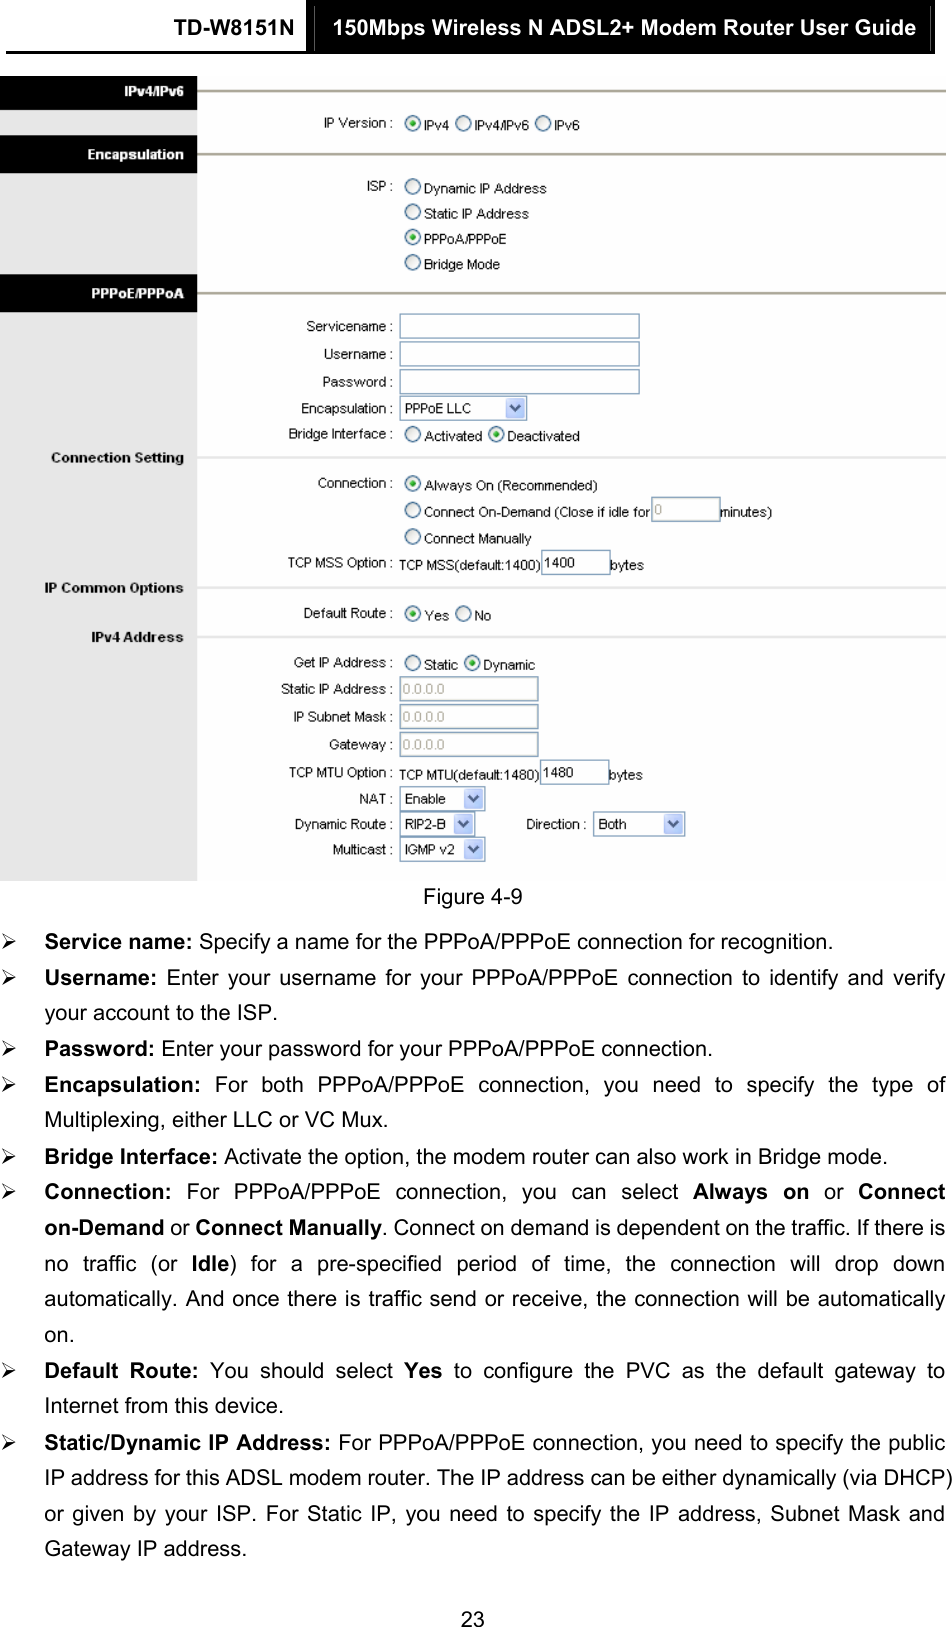 TD-W8151N  150Mbps Wireless N ADSL2+ Modem Router User Guide  23 Figure 4-9  Service name: Specify a name for the PPPoA/PPPoE connection for recognition.    Username:  Enter your username for your PPPoA/PPPoE connection to identify and verify your account to the ISP.  Password: Enter your password for your PPPoA/PPPoE connection.  Encapsulation:  For both PPPoA/PPPoE connection, you need to specify the type of Multiplexing, either LLC or VC Mux.  Bridge Interface: Activate the option, the modem router can also work in Bridge mode.  Connection: For PPPoA/PPPoE connection, you can select Always on or Connect on-Demand or Connect Manually. Connect on demand is dependent on the traffic. If there is no traffic (or Idle) for a pre-specified period of time, the connection will drop down automatically. And once there is traffic send or receive, the connection will be automatically on.  Default Route: You should select Yes to configure the PVC as the default gateway to Internet from this device.  Static/Dynamic IP Address: For PPPoA/PPPoE connection, you need to specify the public IP address for this ADSL modem router. The IP address can be either dynamically (via DHCP) or given by your ISP. For Static IP, you need to specify the IP address, Subnet Mask and Gateway IP address. 